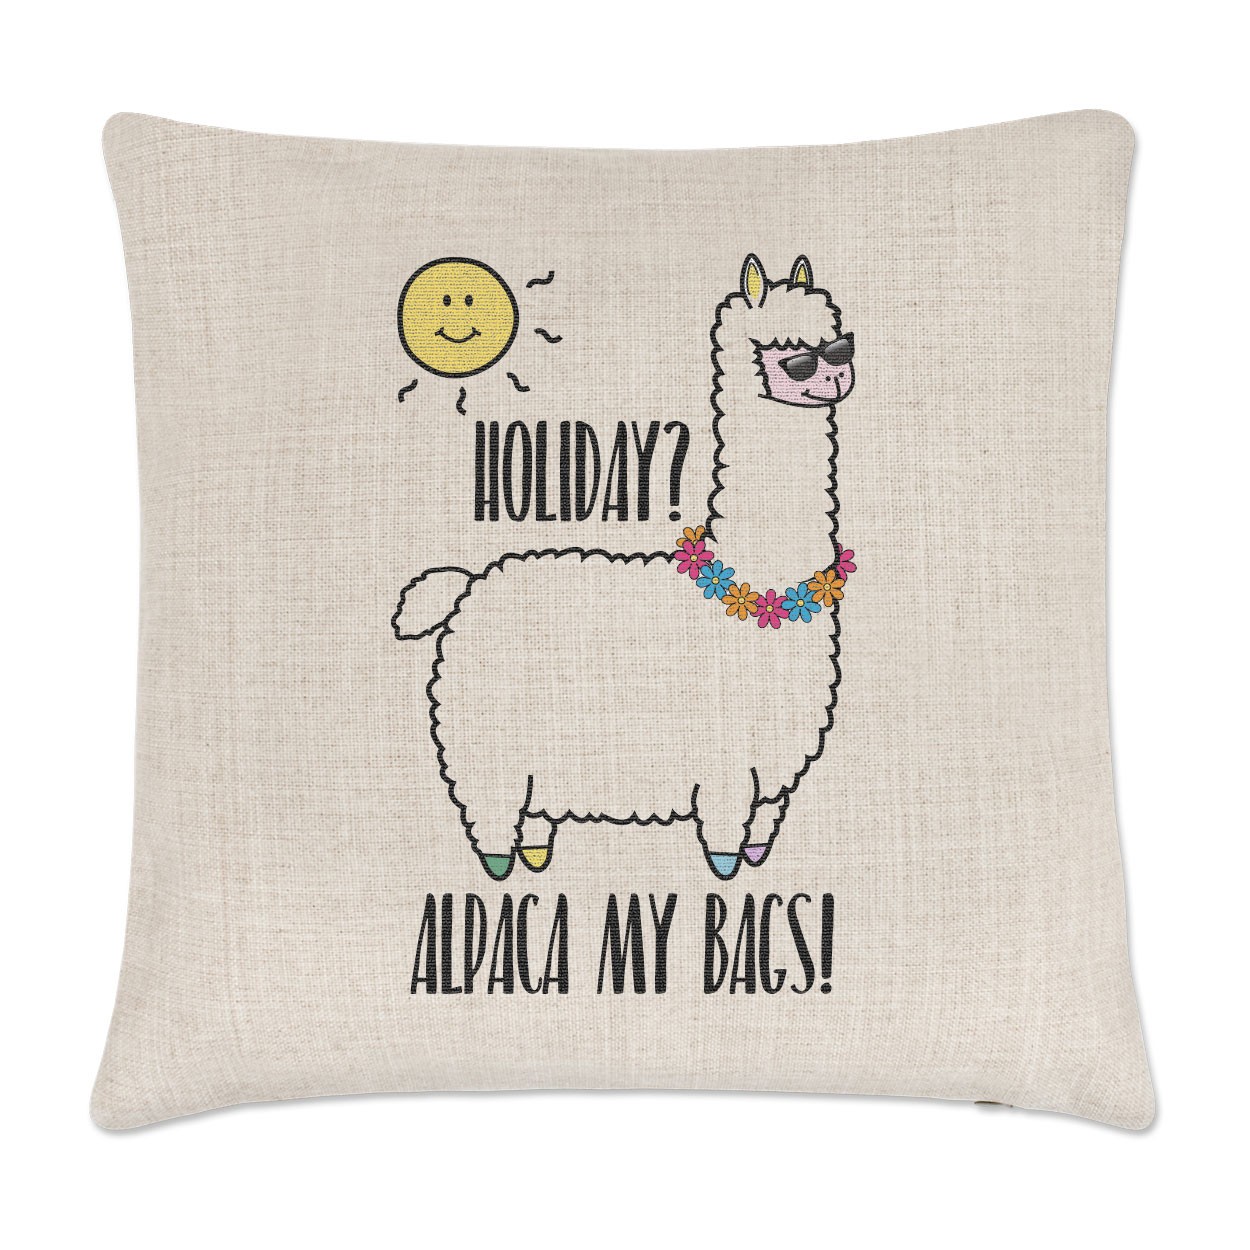 Holiday Alpaca My Bags Linen Cushion Cover